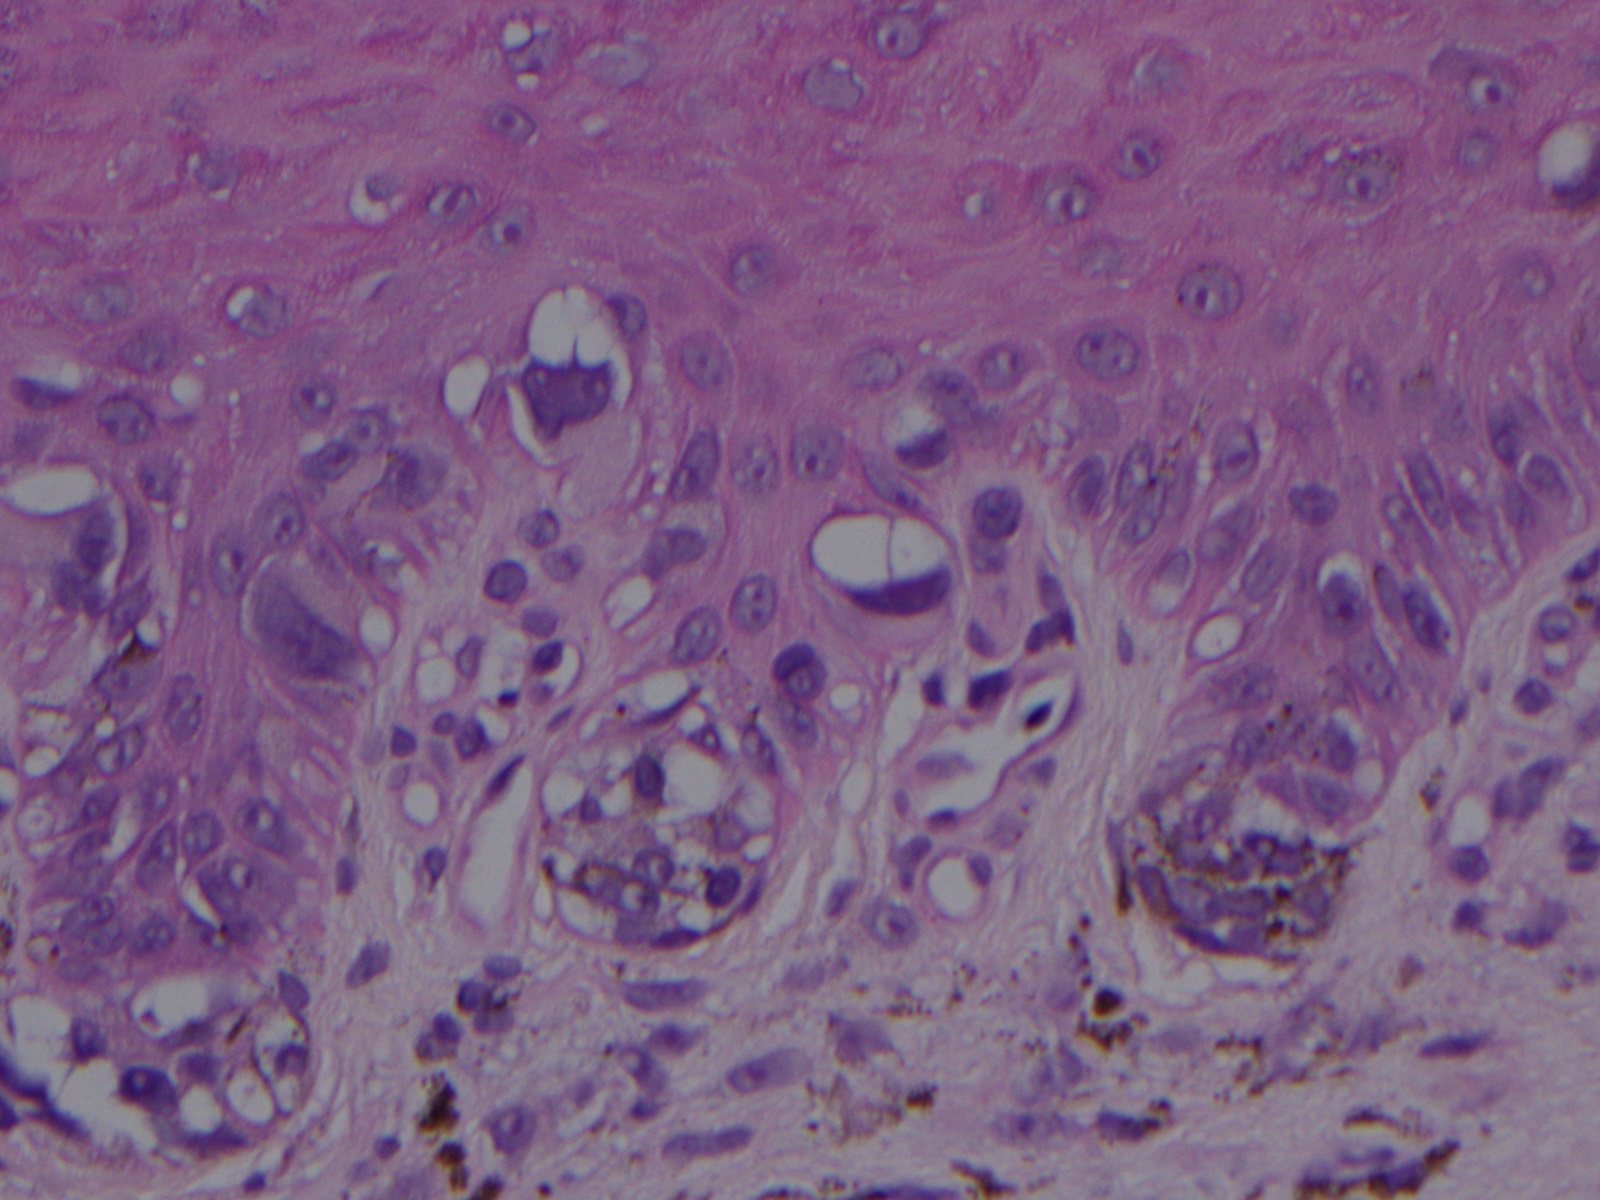 This Hematoxylin and Eosin stained section of an acral lentiginous melanoma in-situ shows large atypical melanocytes with pleomorphic and hyperchromatic nuclei arranged along the dermal-epidermal junction.